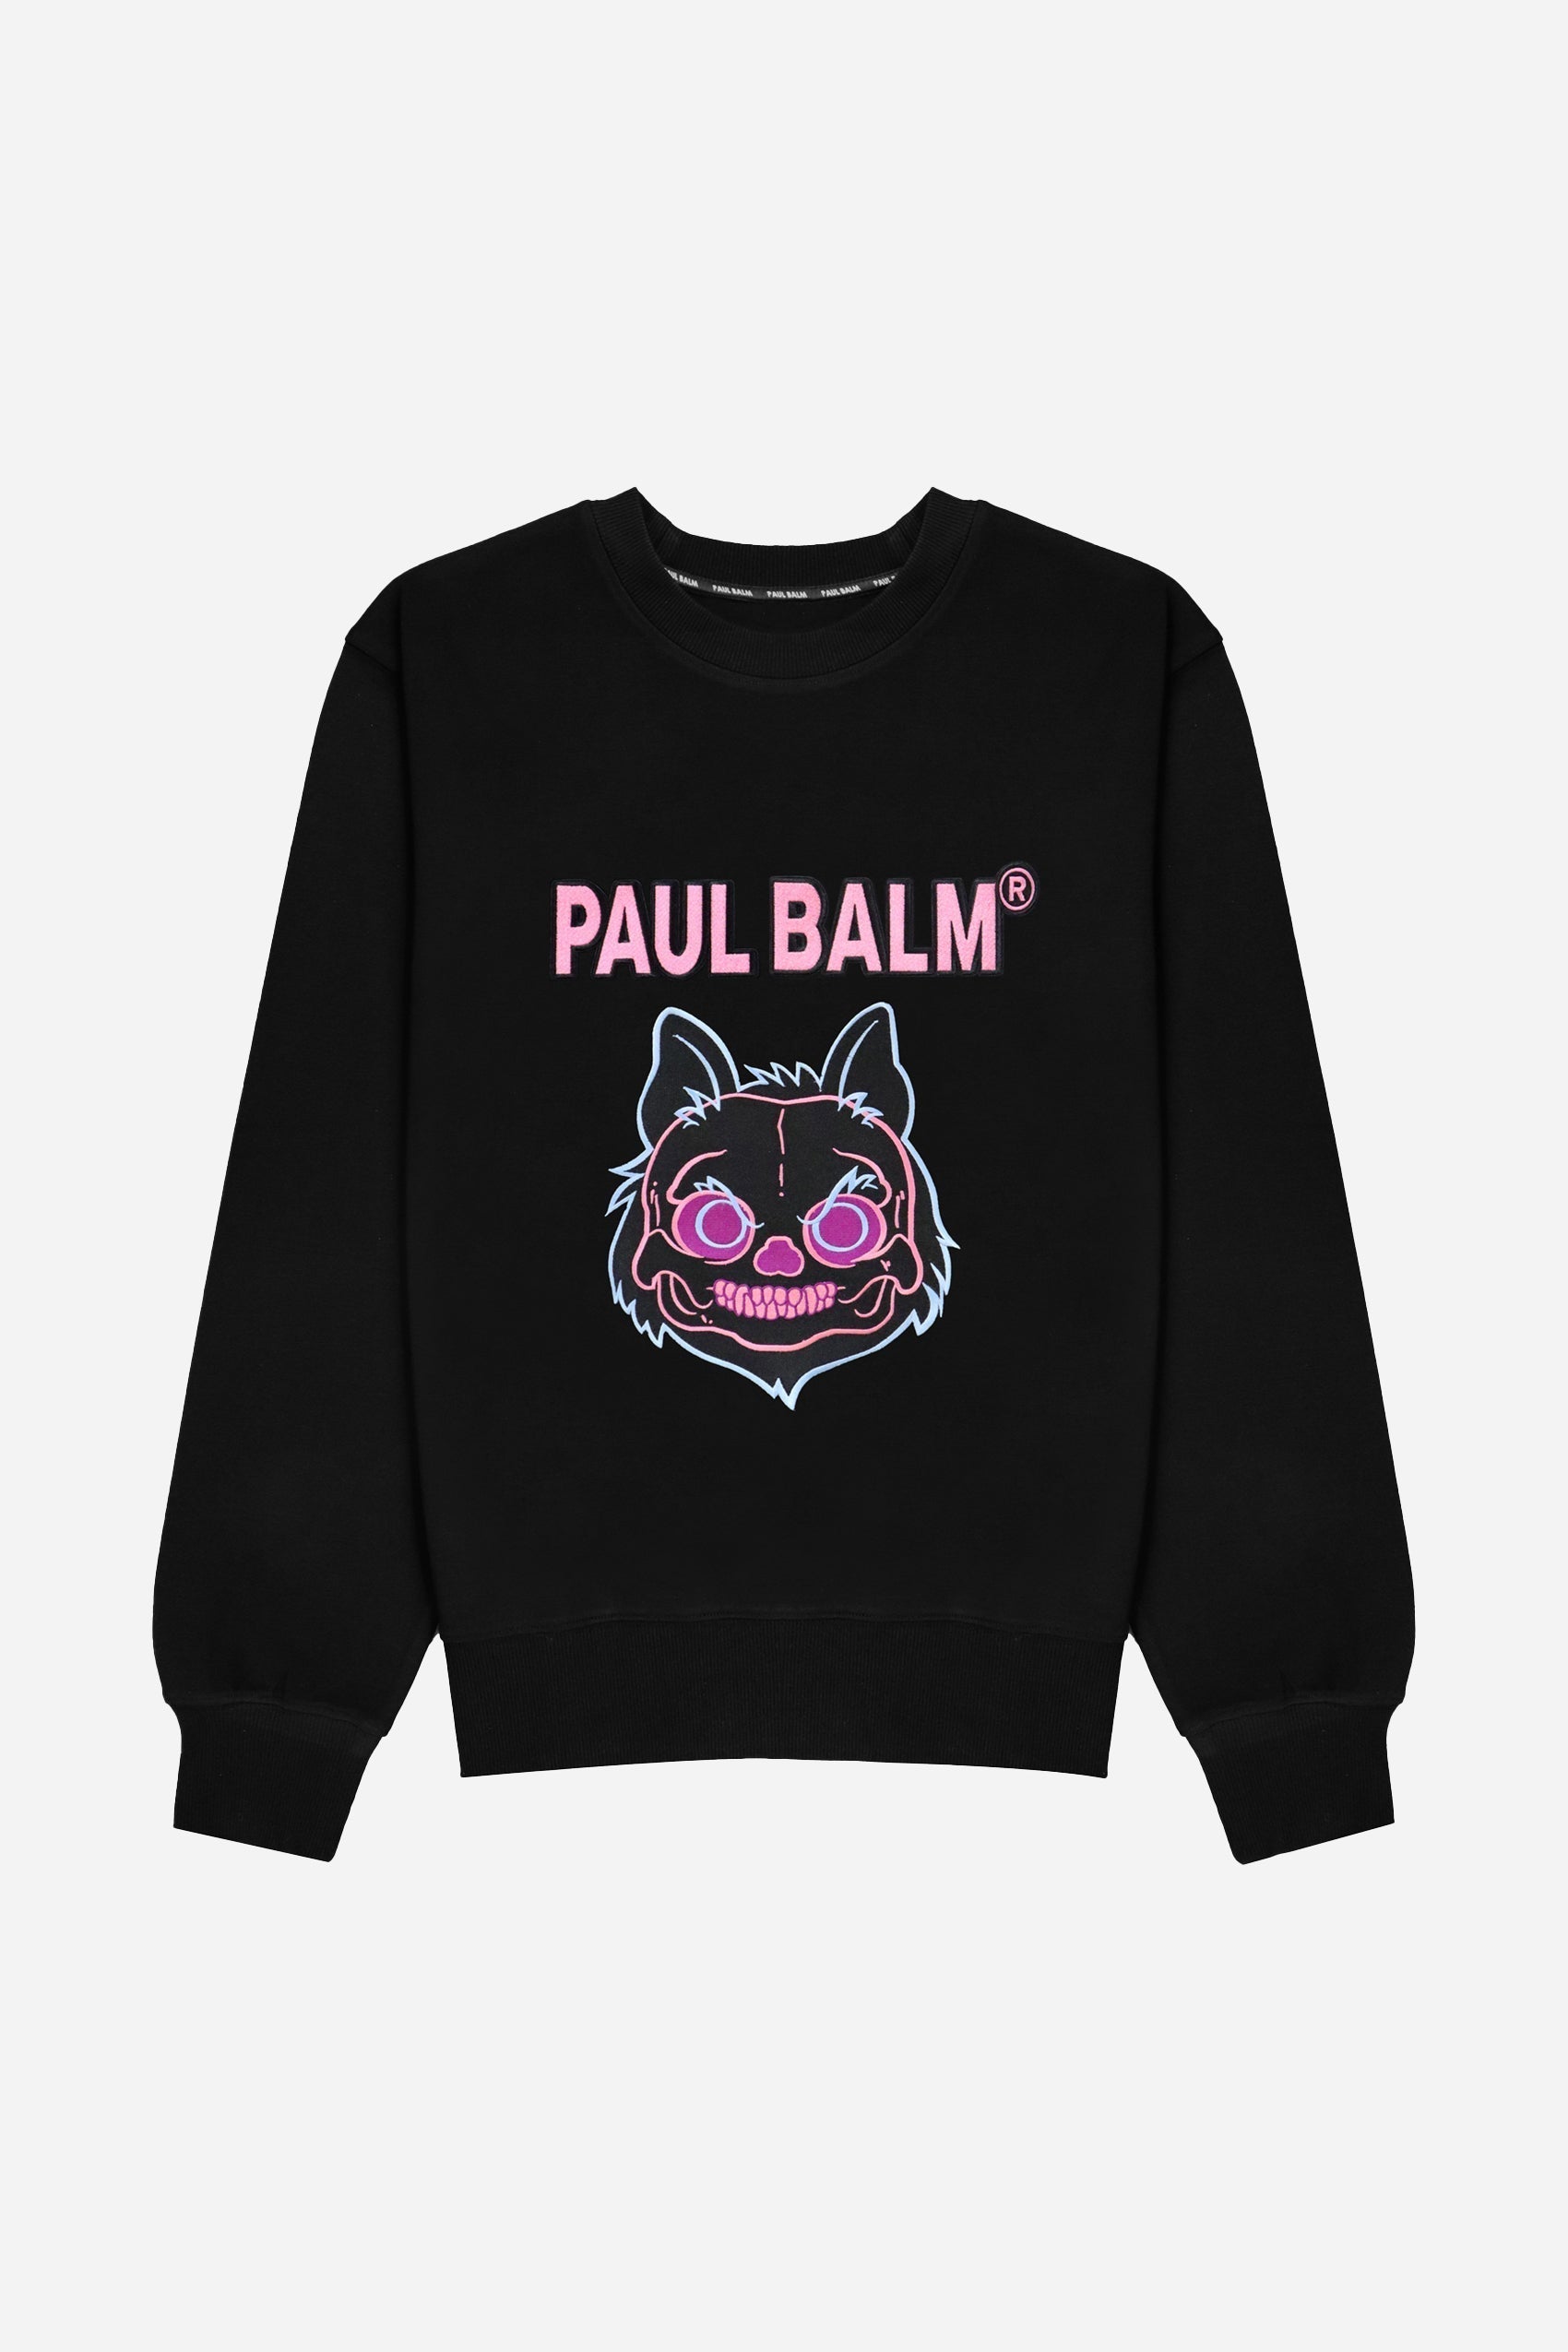 Embroidered X-Ray Sweatshirt - Limited to 300 - PAUL BALM WORLD